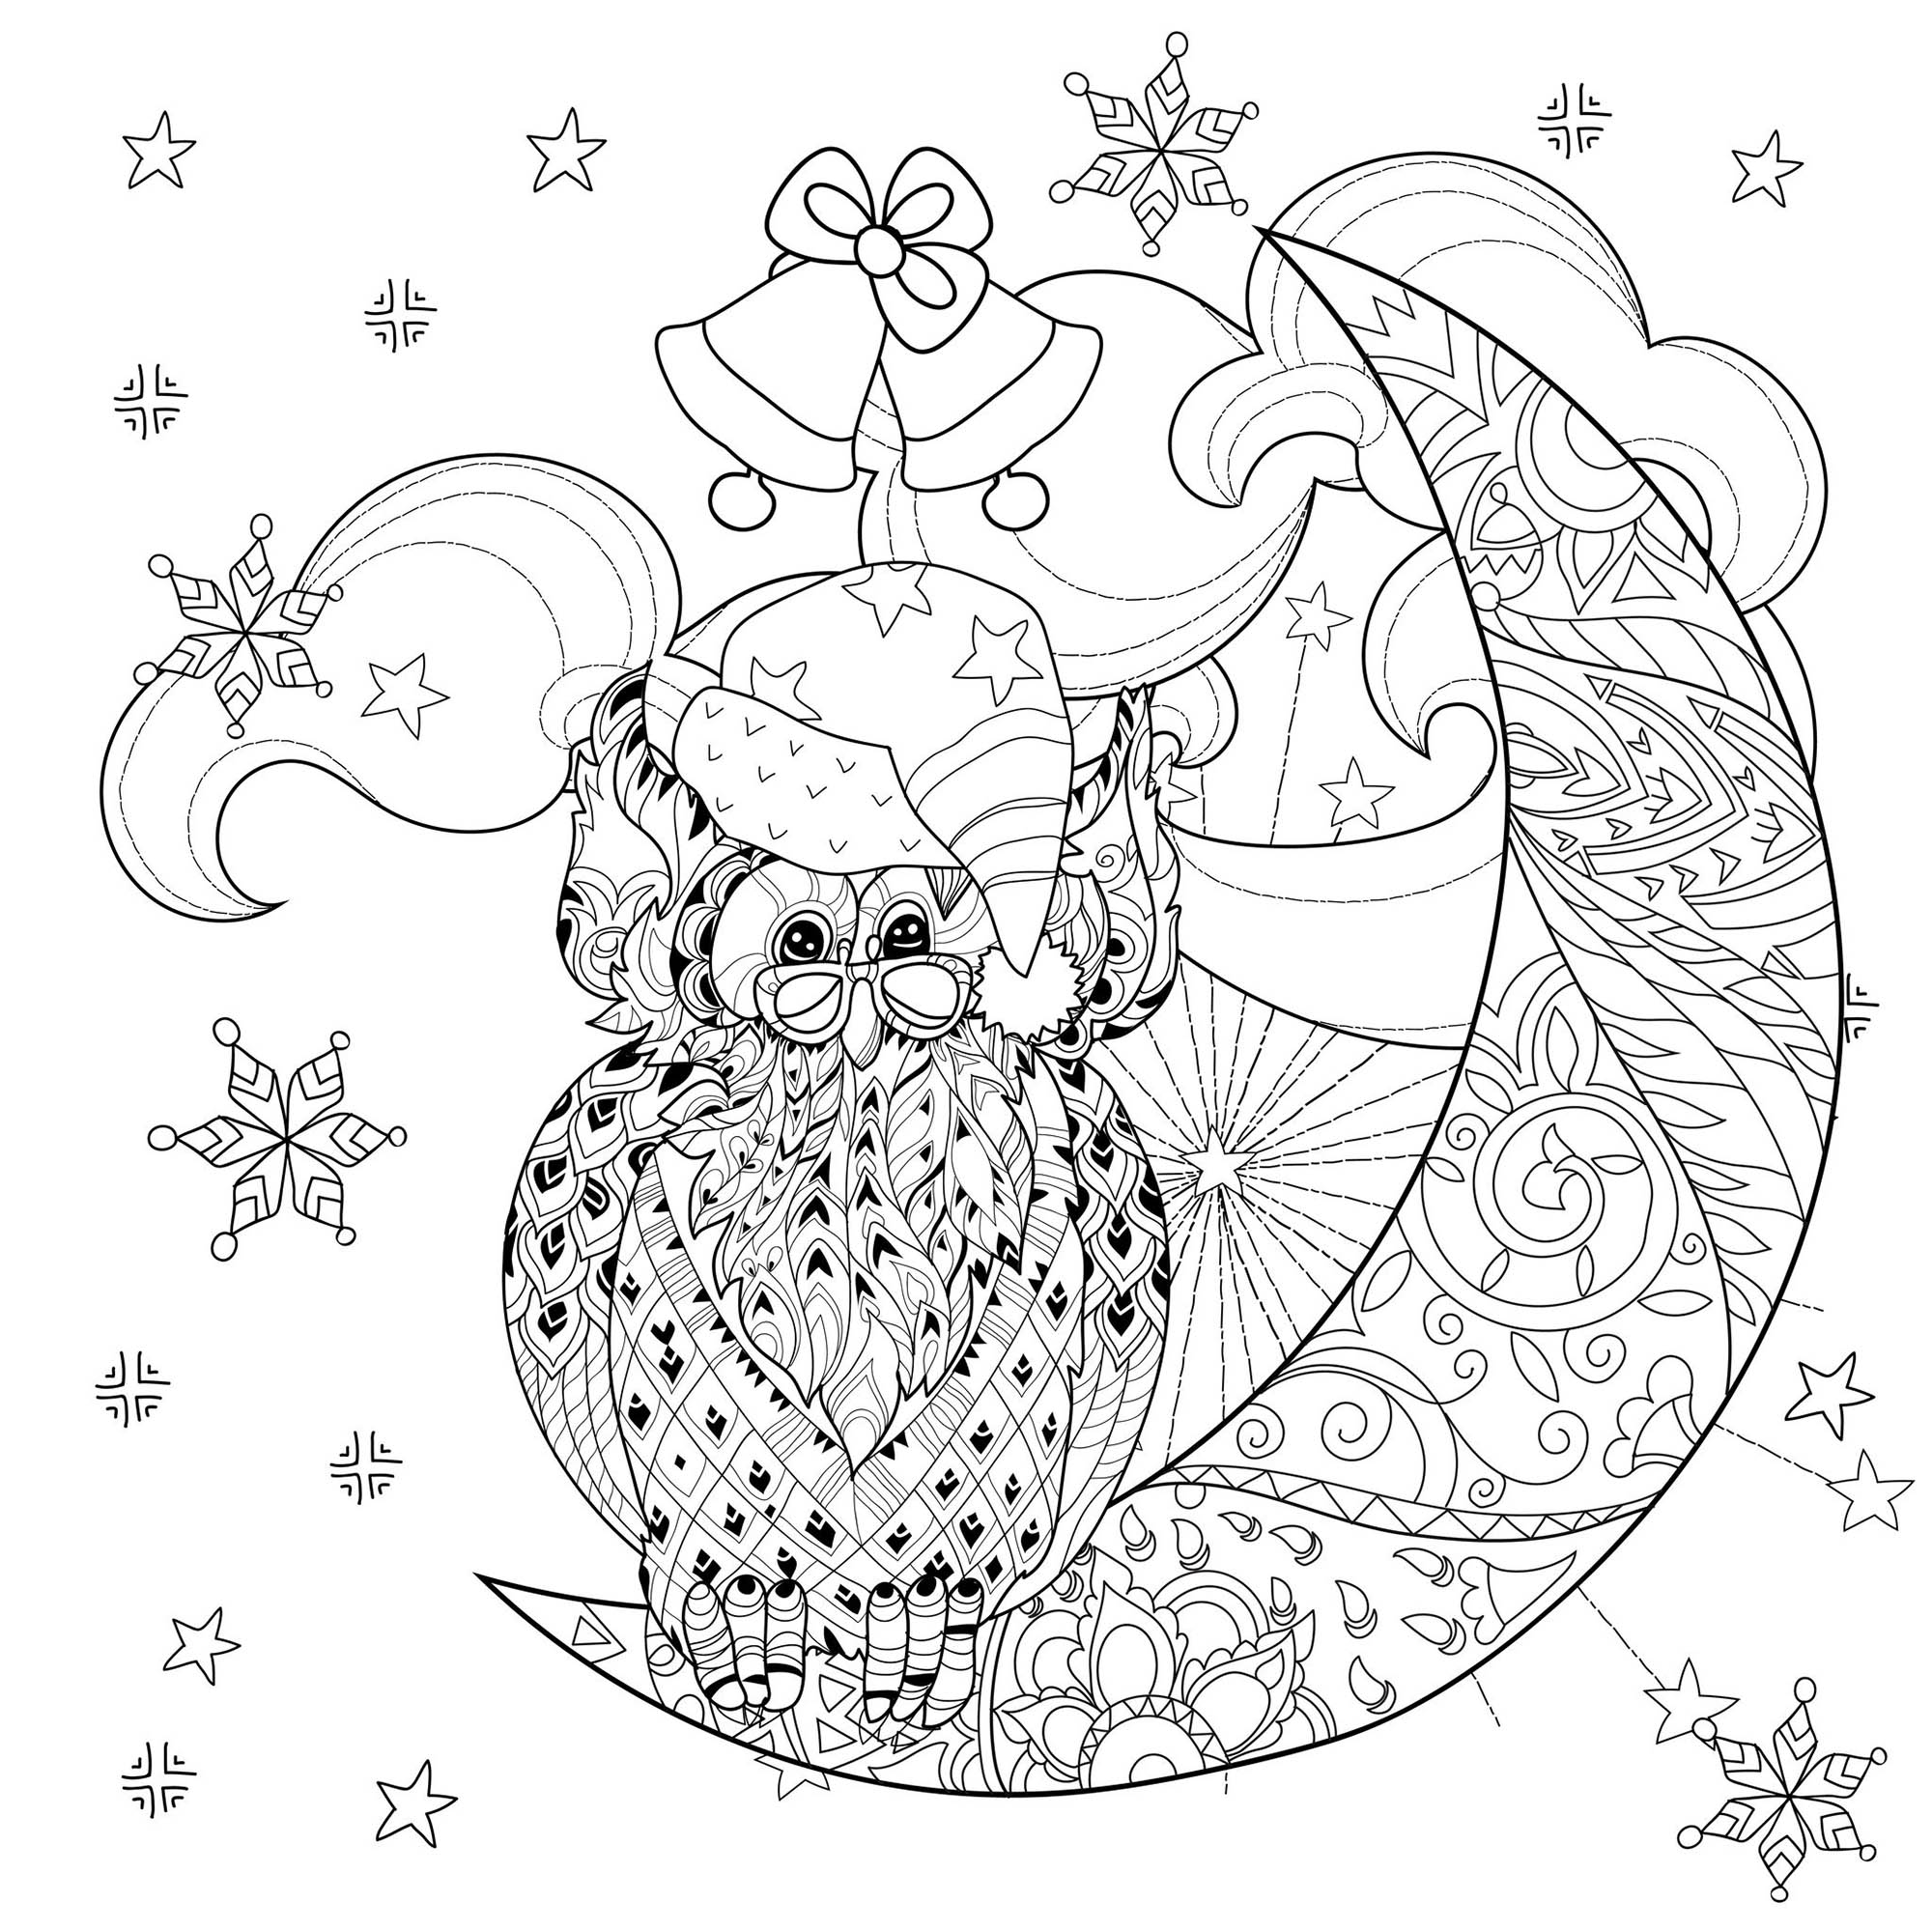 Color this Cartoon Owl with glasses and Santa Claus hat, sitting on a half moon, with beautiful winter clouds and stars, Source : 123rf   Artist : Ирина Язева